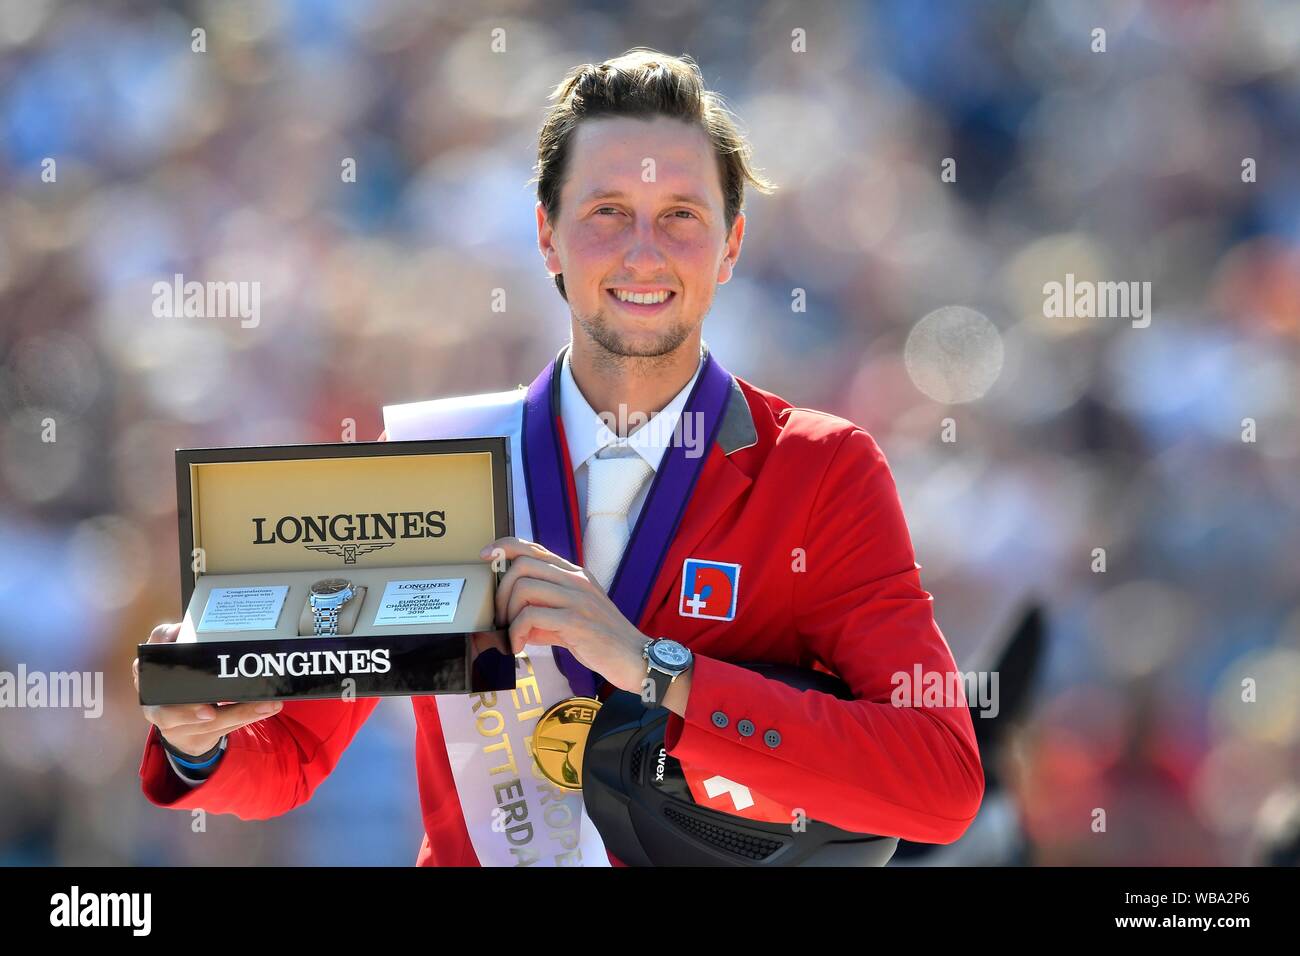 Martin Fuchs SUI during the Longines FEI Jumping European Championship 2019 on August 25 2019 in Rotterdam, Netherlands. Credit: Sander Chamid/SCS/AFLO/Alamy Live News Stock Photo